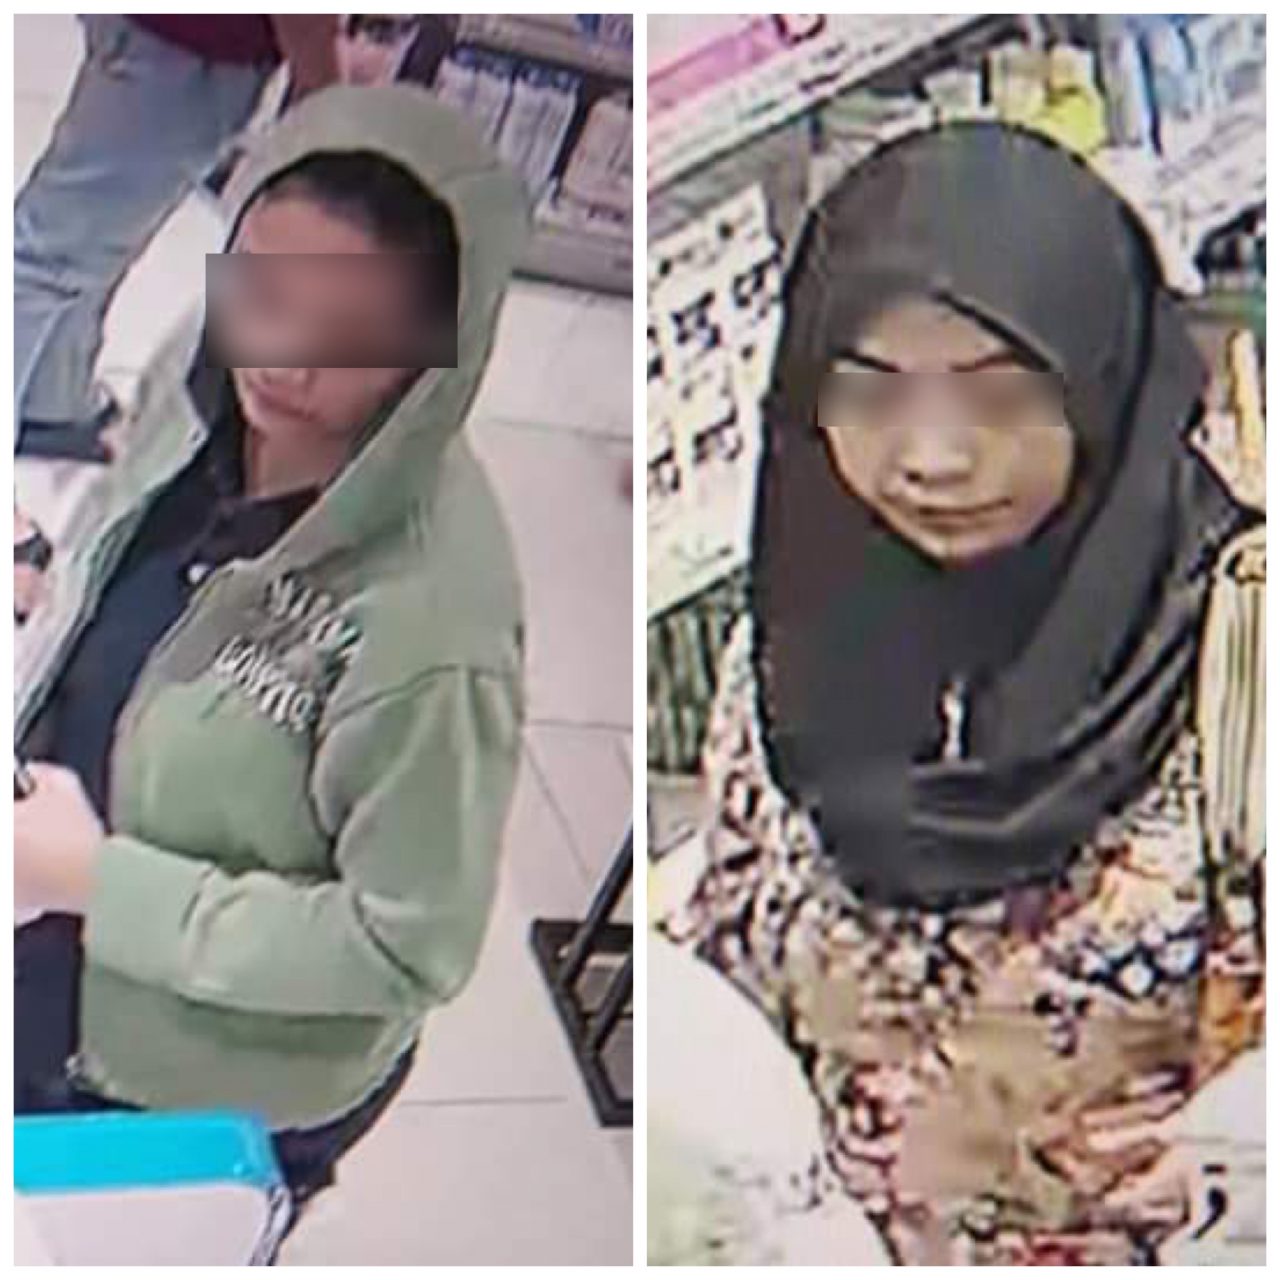 Shoplifting Police Looking For Two Women